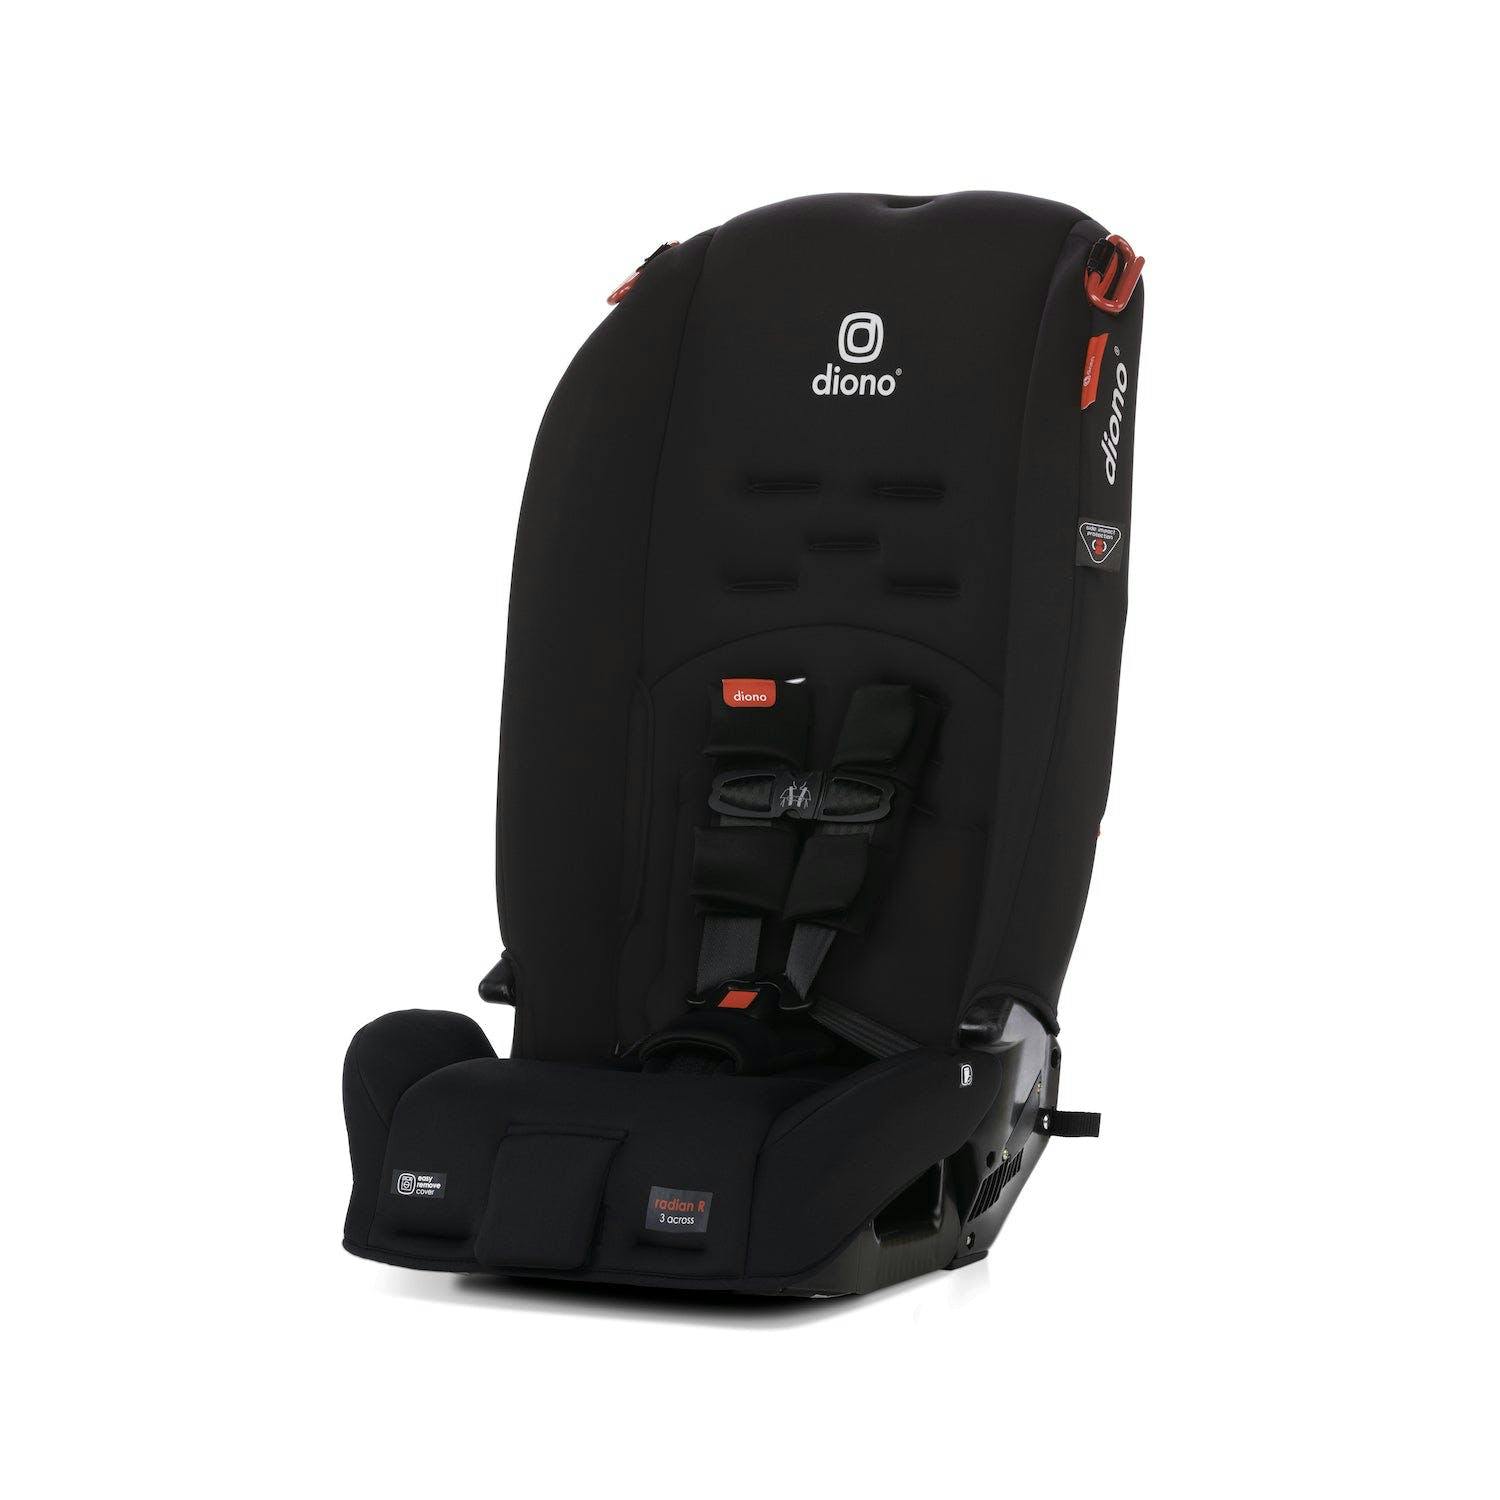 Diono Radian 3R Latch All-in-One Convertible Car Seat and Booster